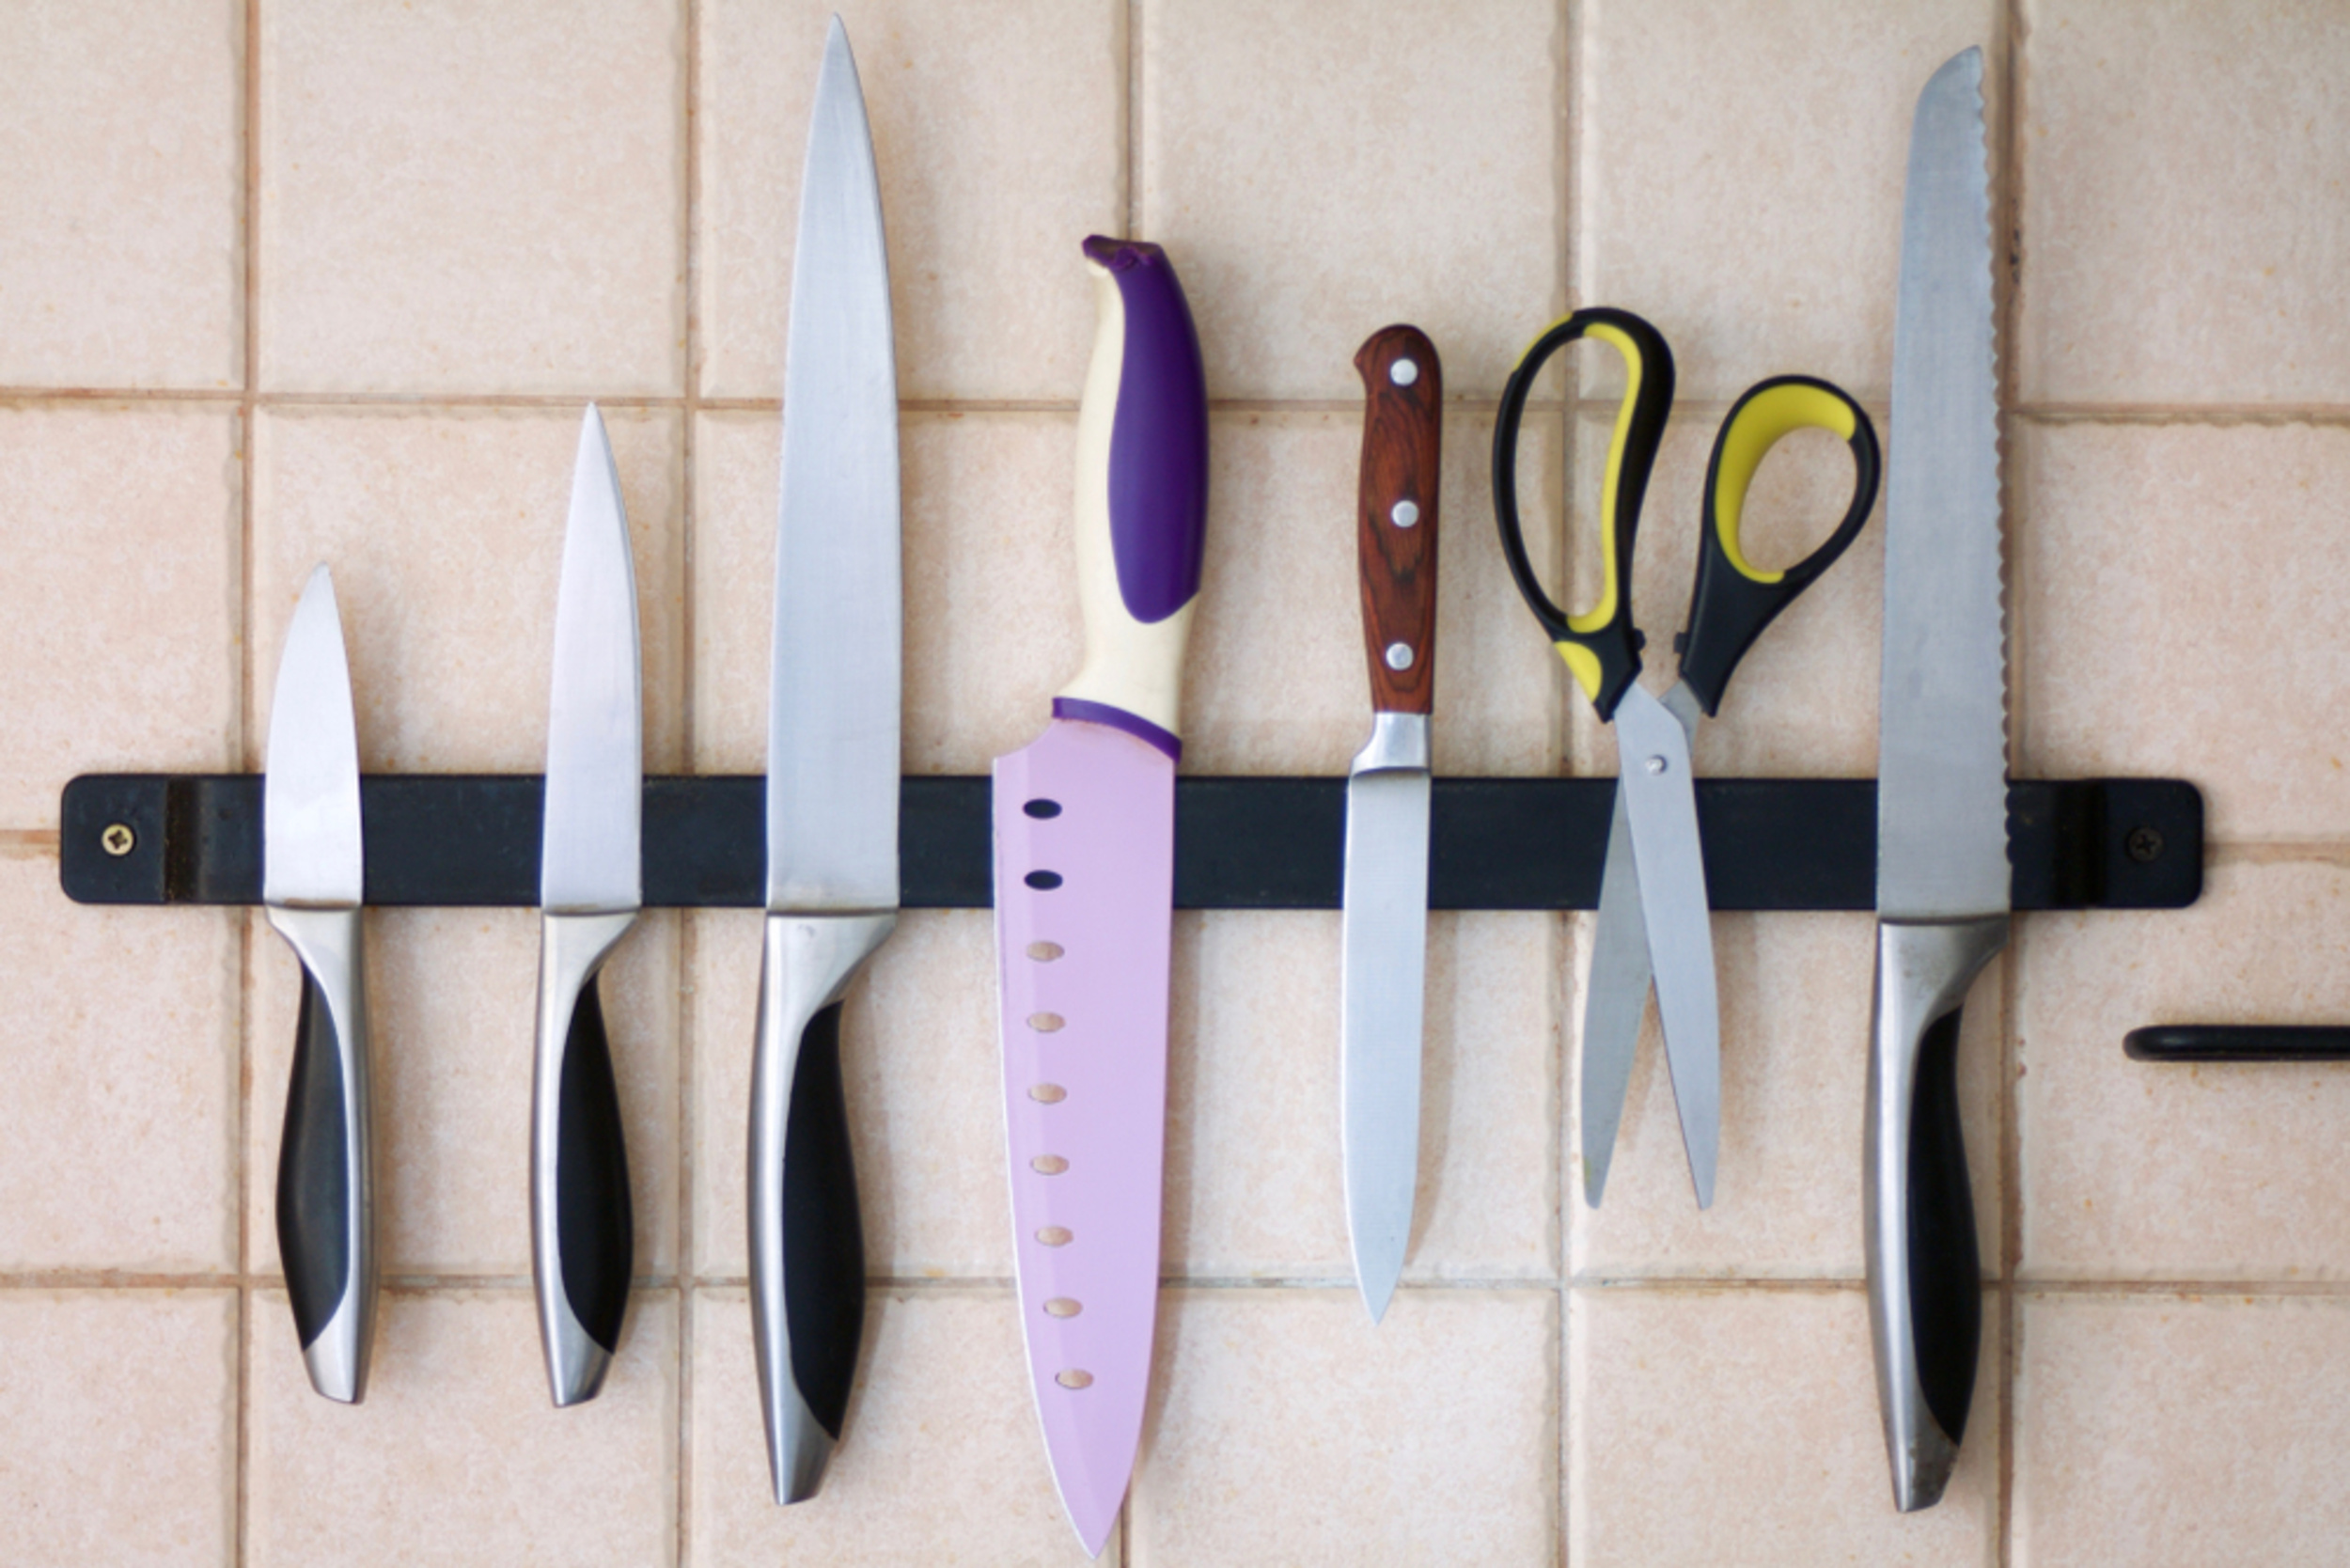 <p>Magnetic strips can help you save a ton of space in the kitchen and garage, and they're a cheap storage solution for knives, tools, and anything else made from metal. You can also add magnets to small containers and use those to store everything from spices to screws! </p><p><a href='https://www.msn.com/en-us/community/channel/vid-cj9pqbr0vn9in2b6ddcd8sfgpfq6x6utp44fssrv6mc2gtybw0us'>Follow us on MSN to see more of our exclusive lifestyle content.</a></p>